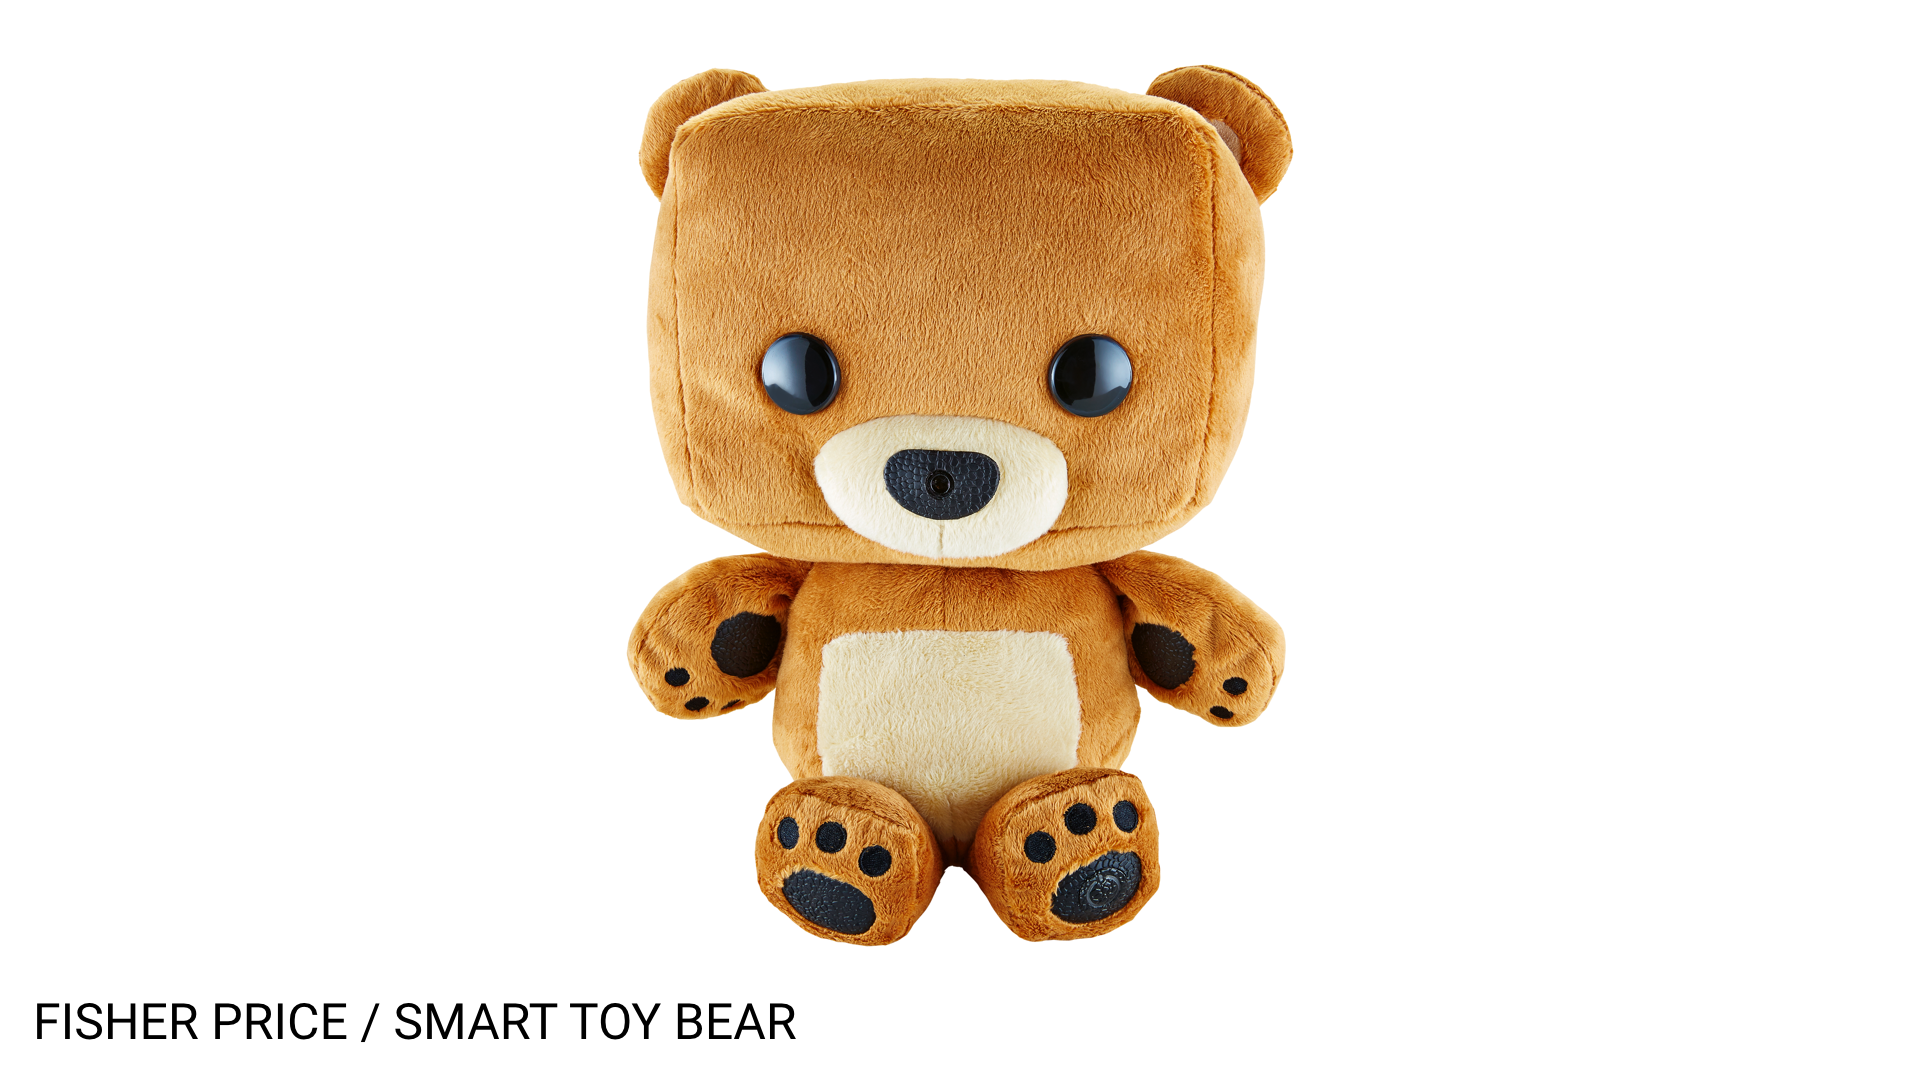 Photo of the Fisher Price Smart Toy Bear